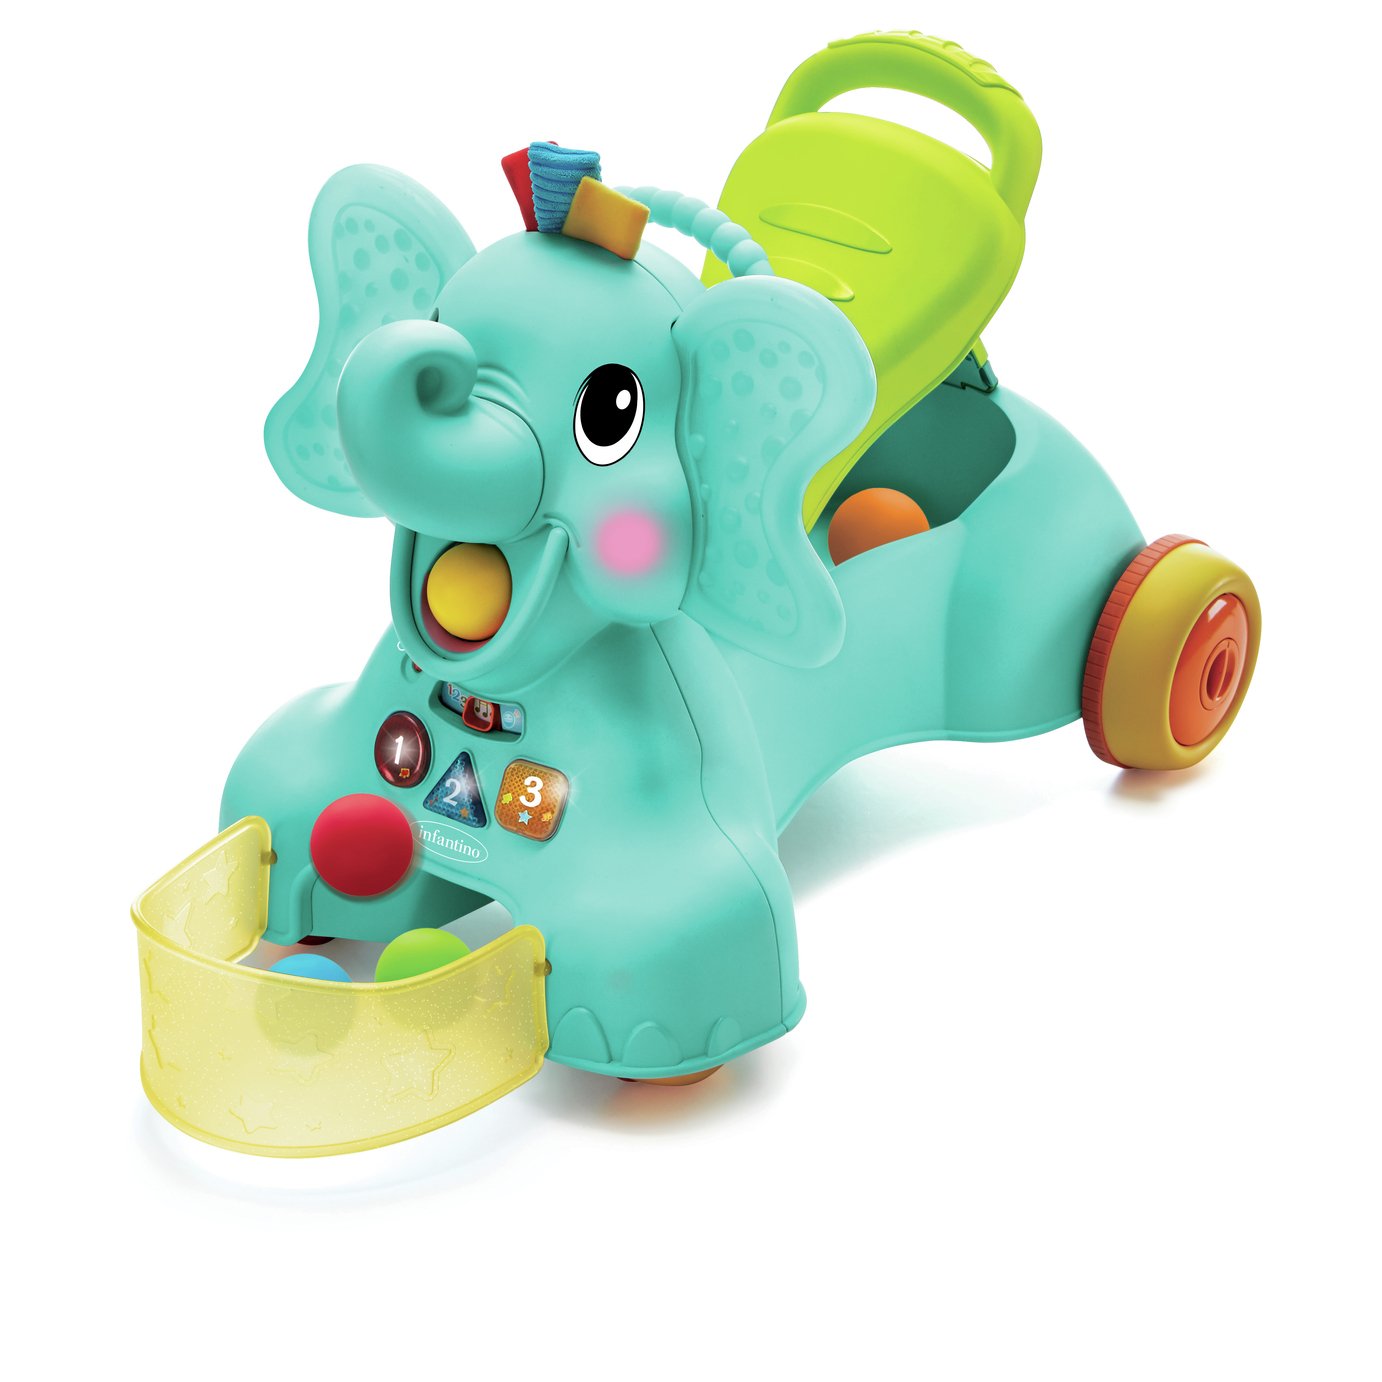 argos toys sit and ride